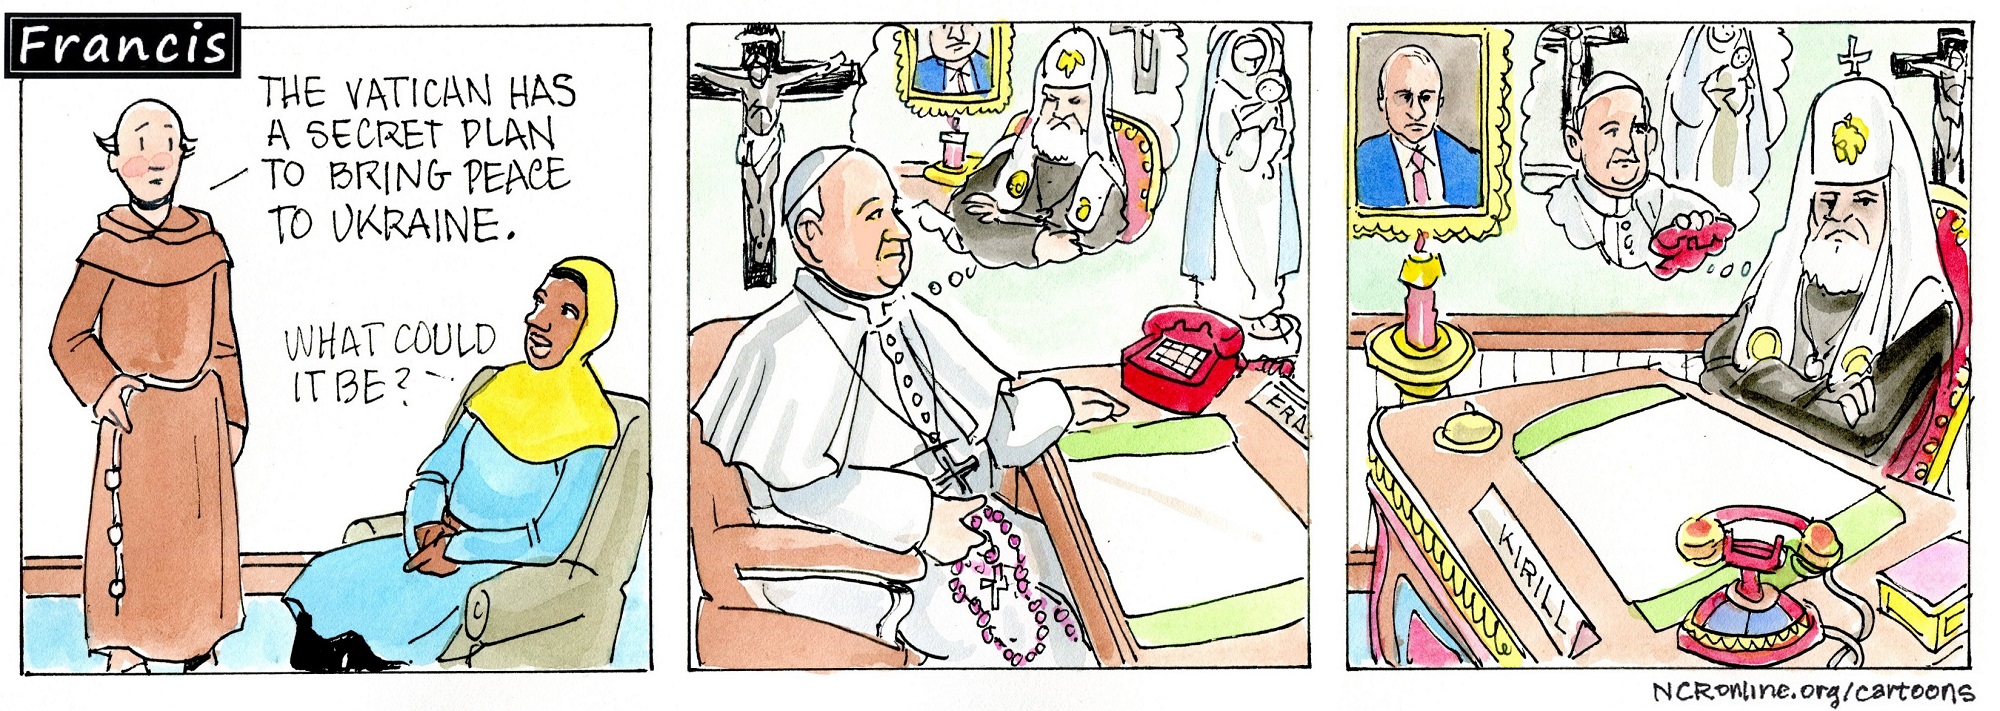 Francis, the comic strip: What is the Vatican's secret plan to bring peace to Ukraine?